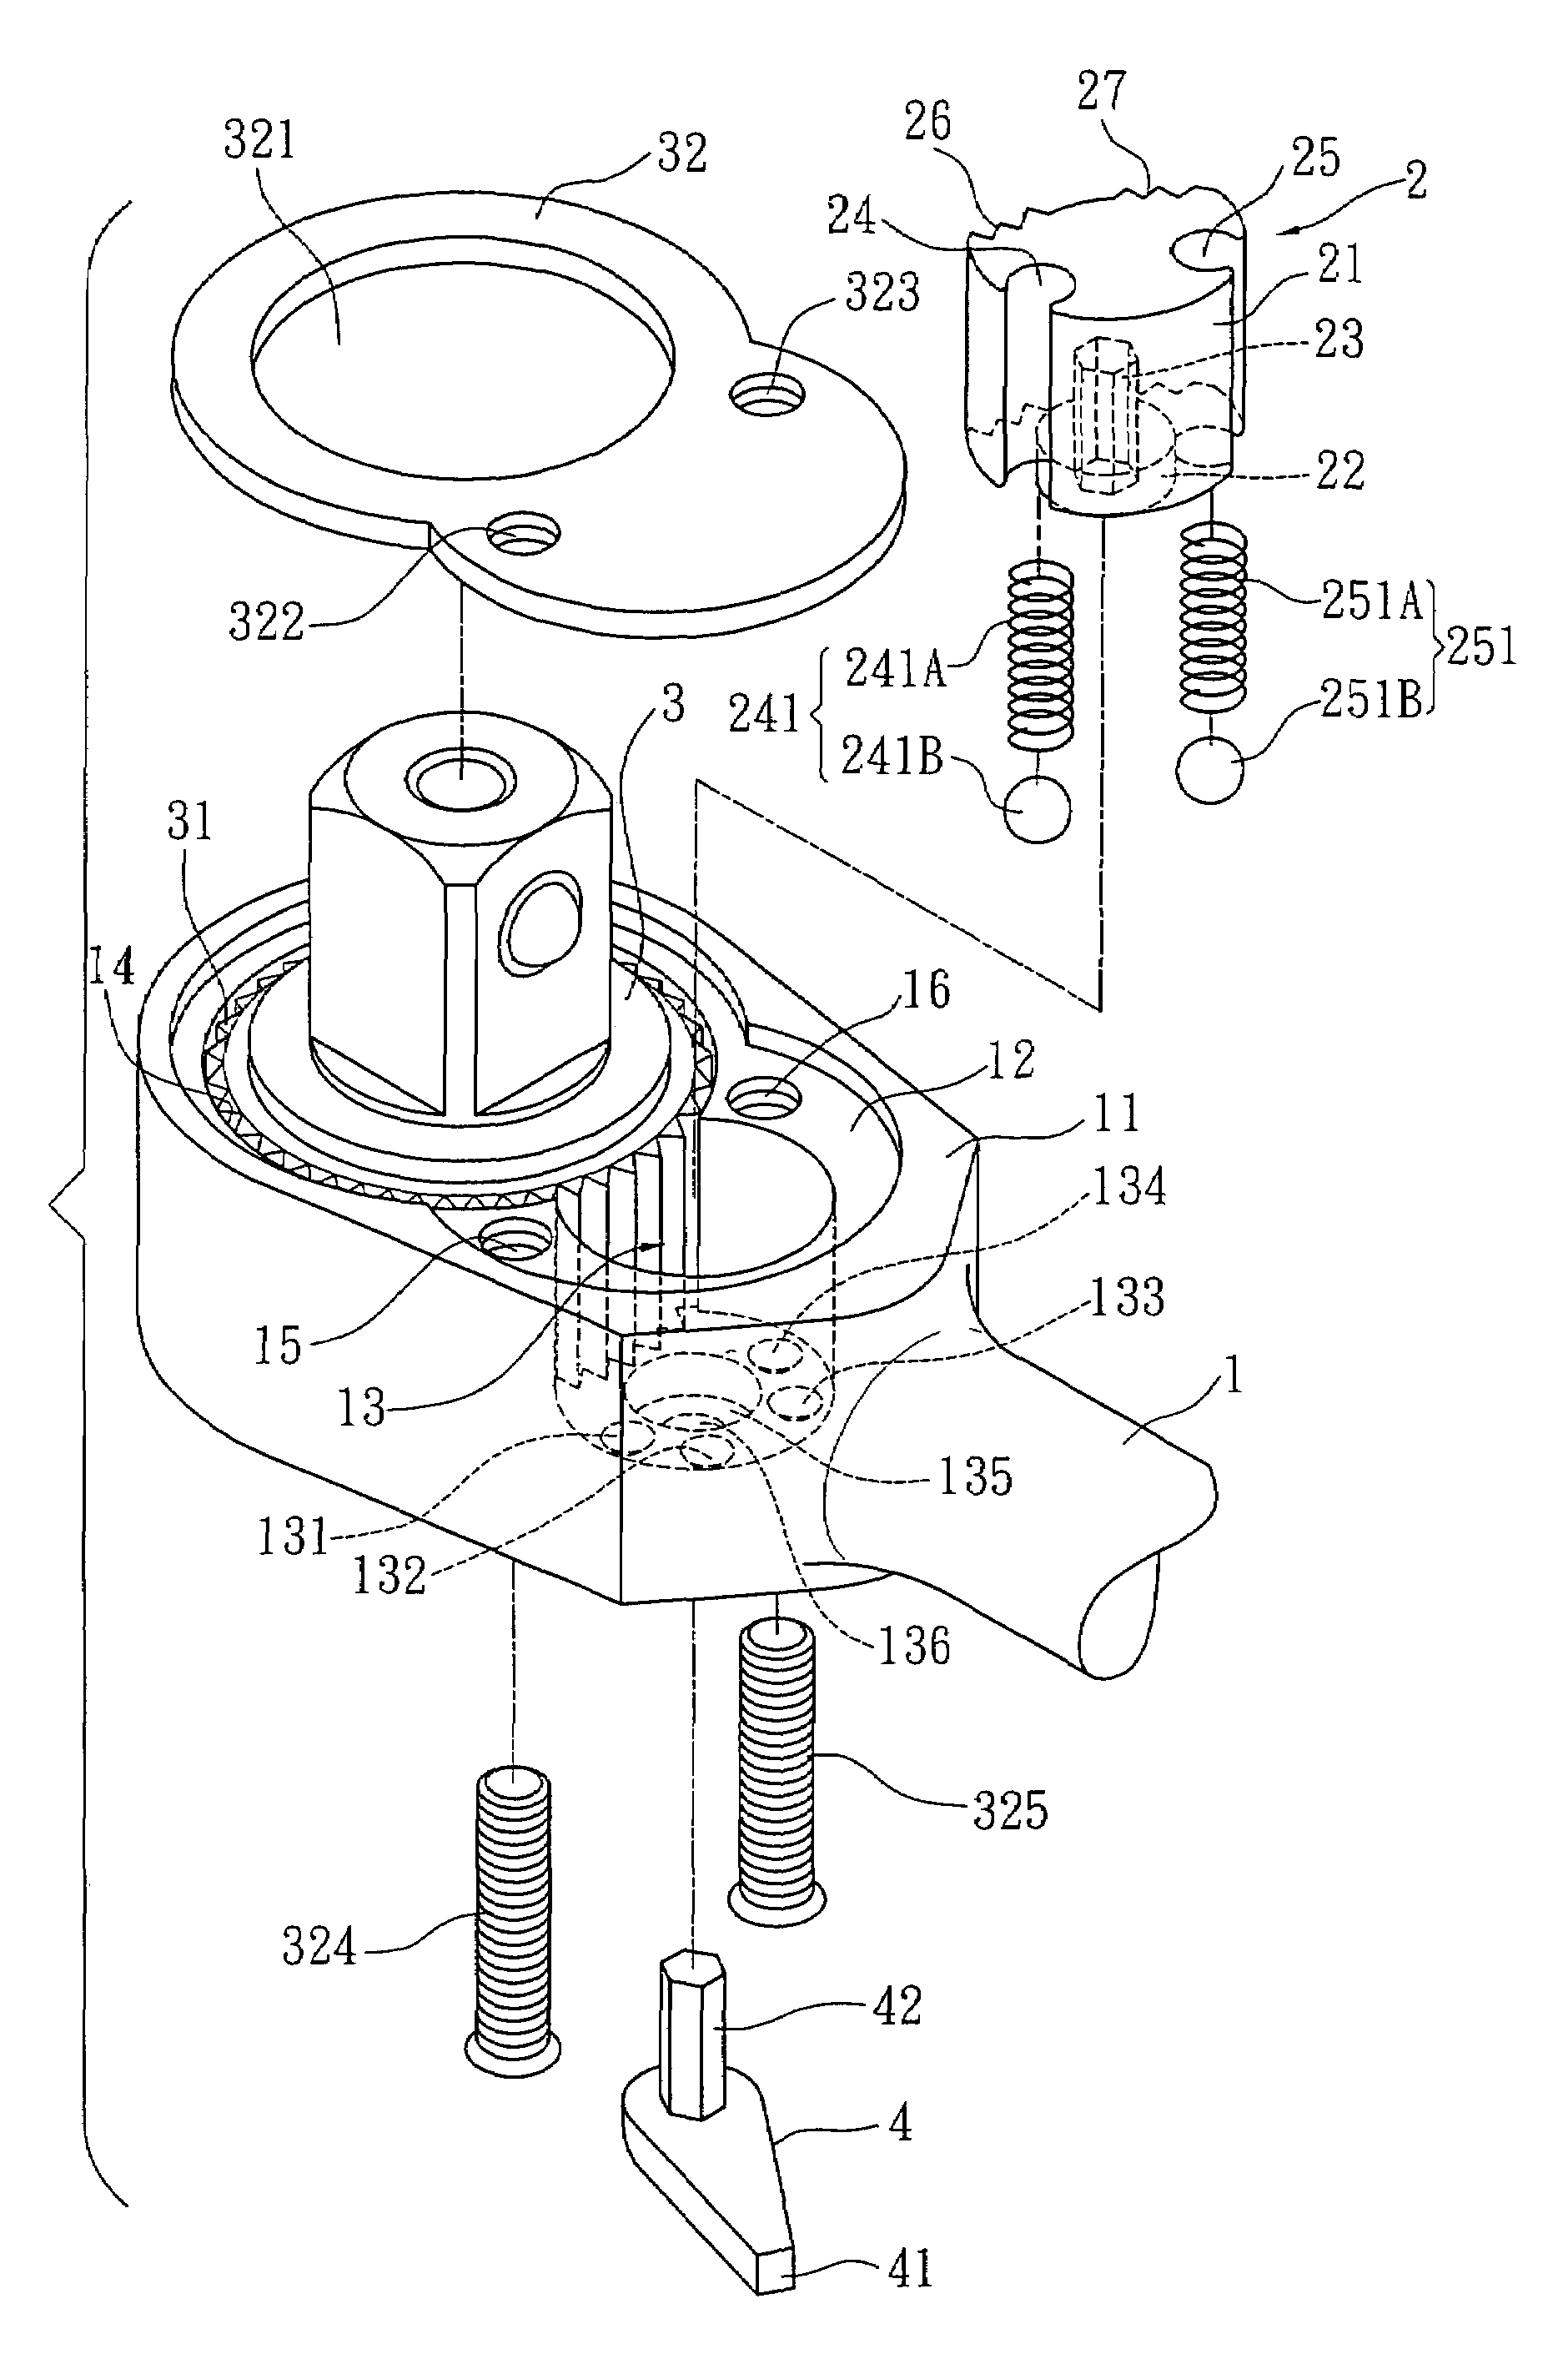 Pawl mechanism of a ratchet wrench